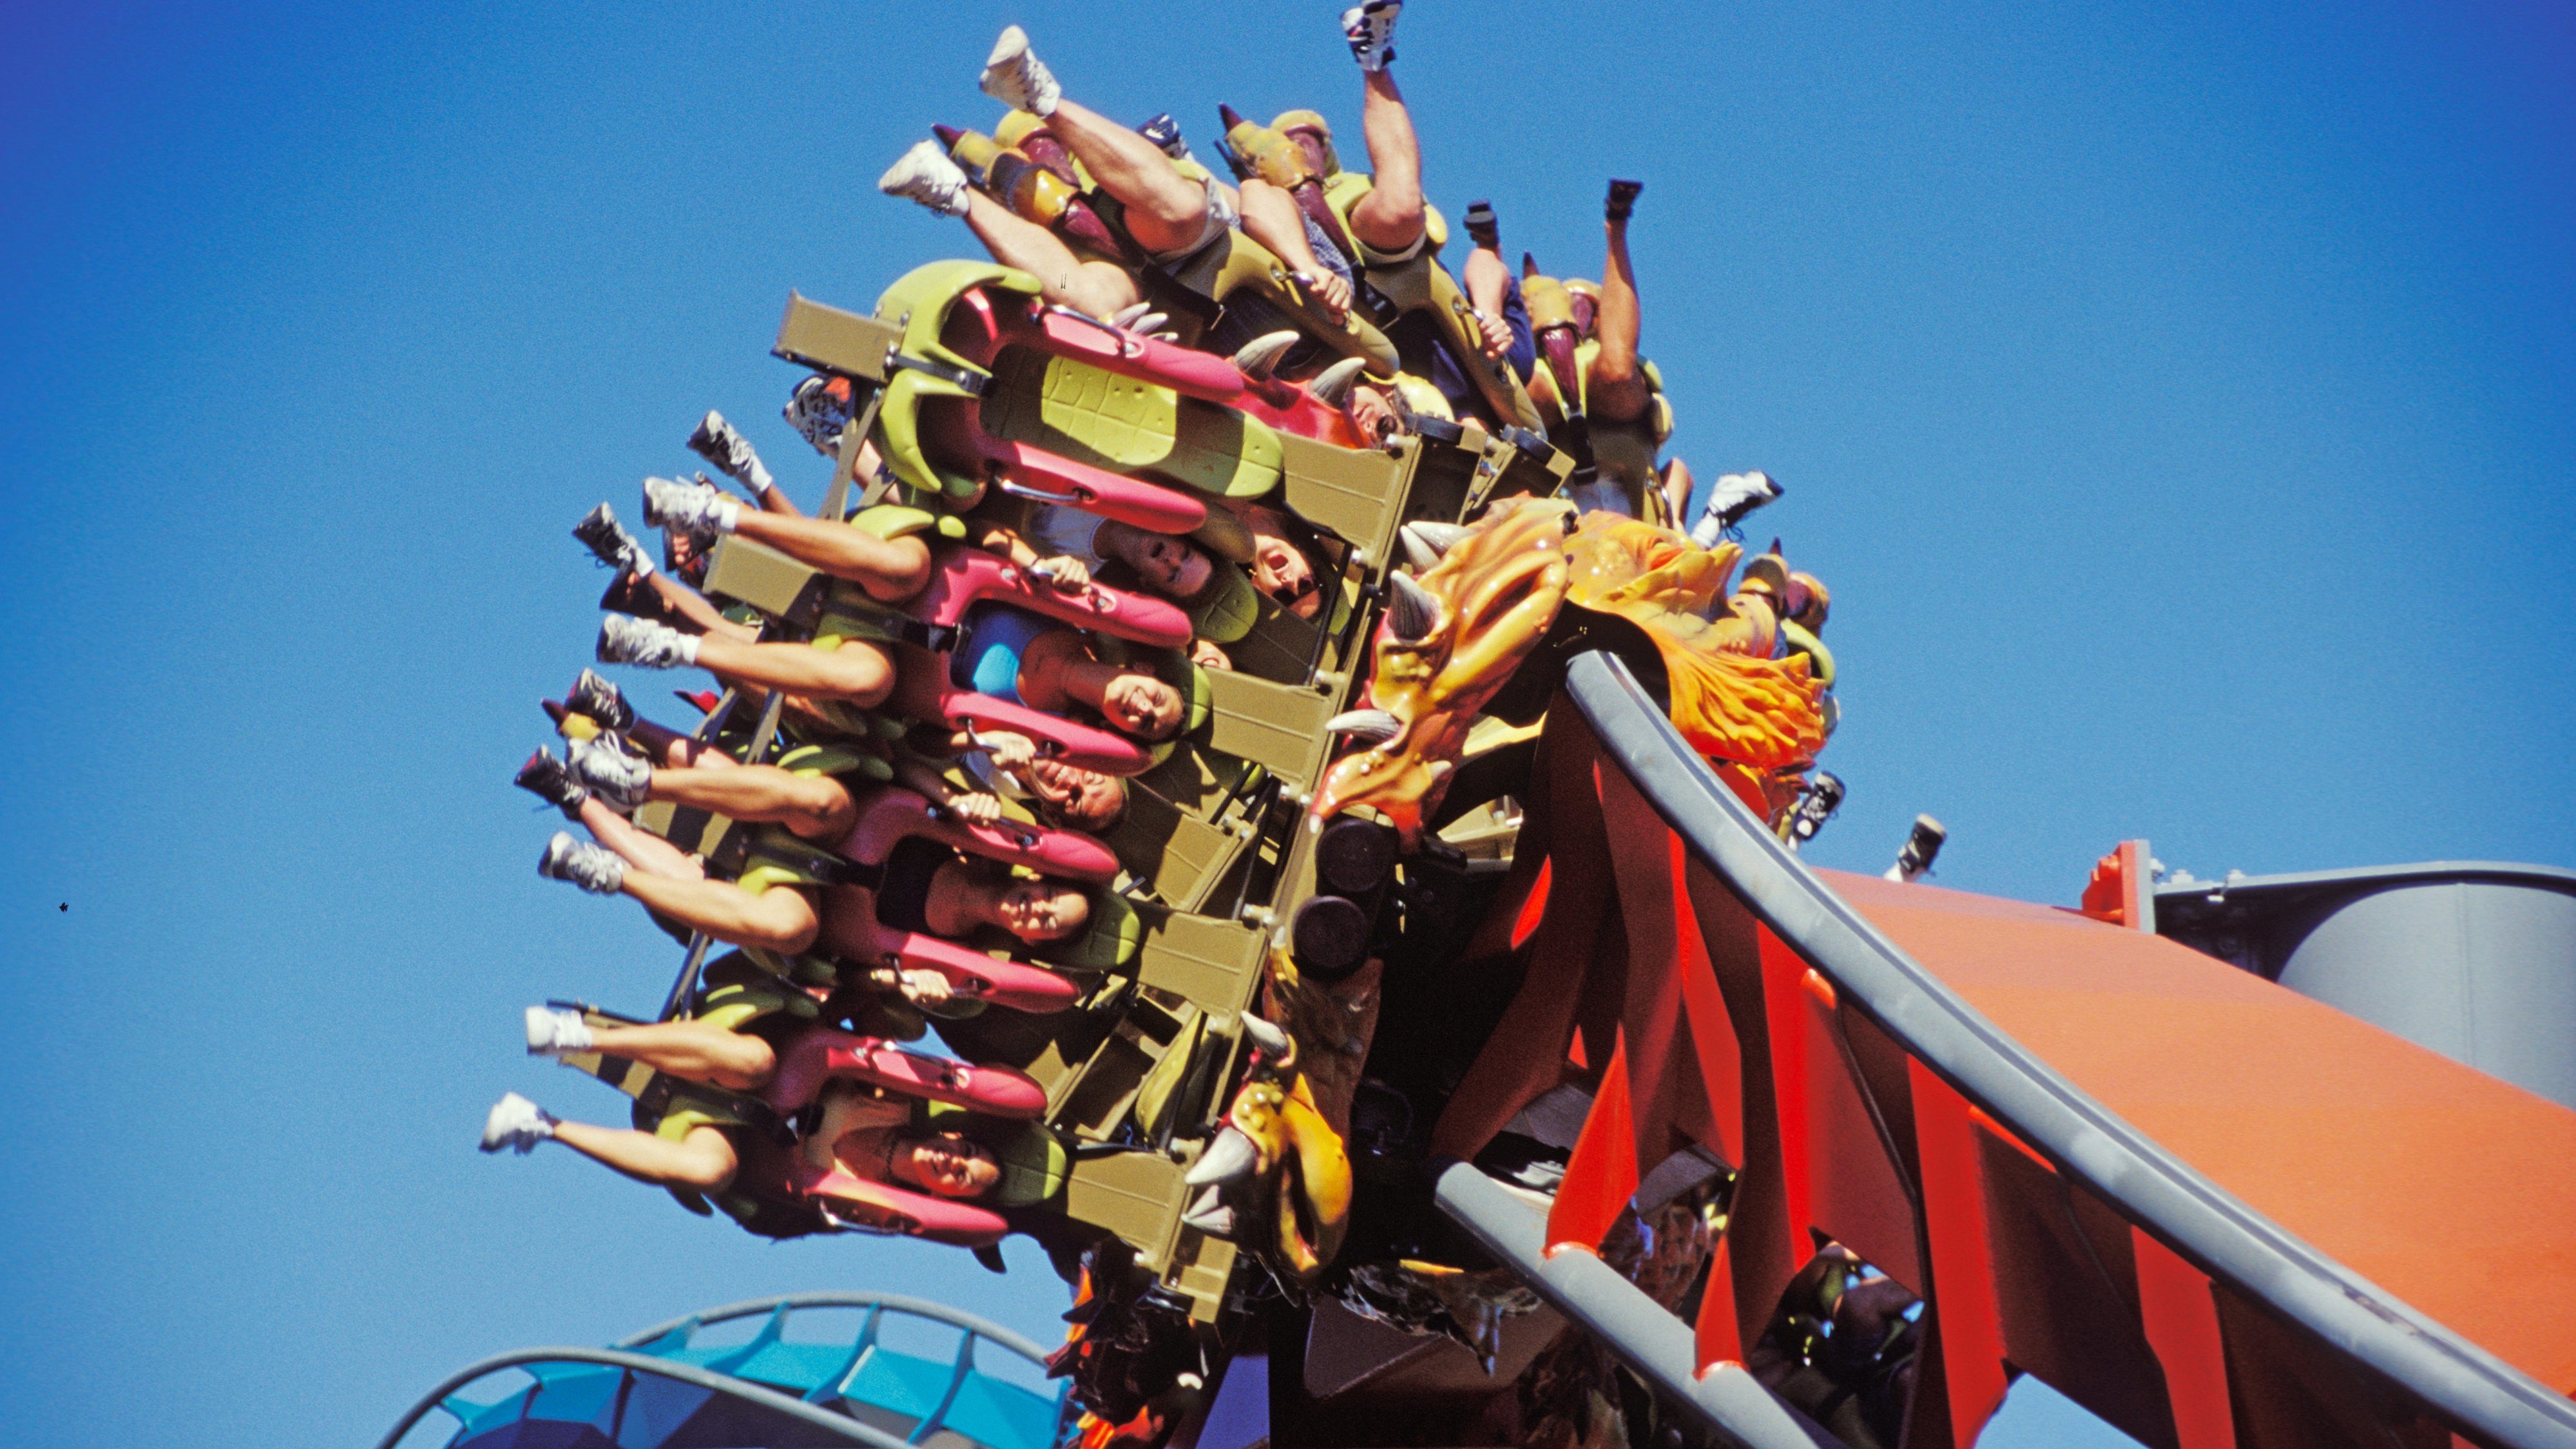 21 of the Best Theme Parks in the US - Stuck on the Go